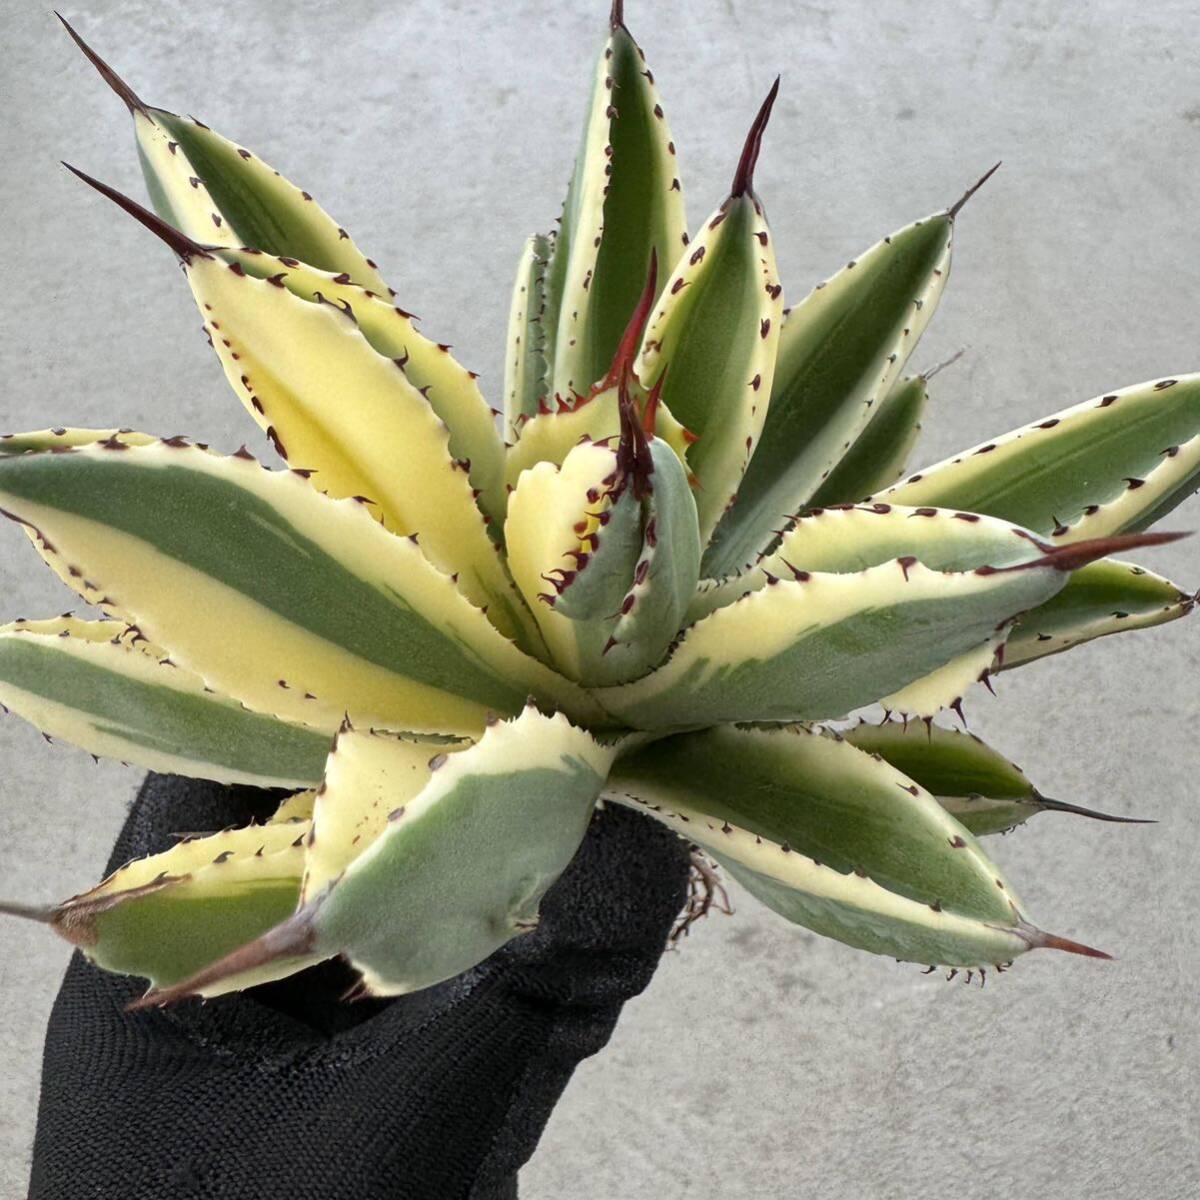 Uncle Sam - アガベ 'キュービック' ワイド マルギナータ / Agave 'Cubic' wide marginata special variegationの画像5